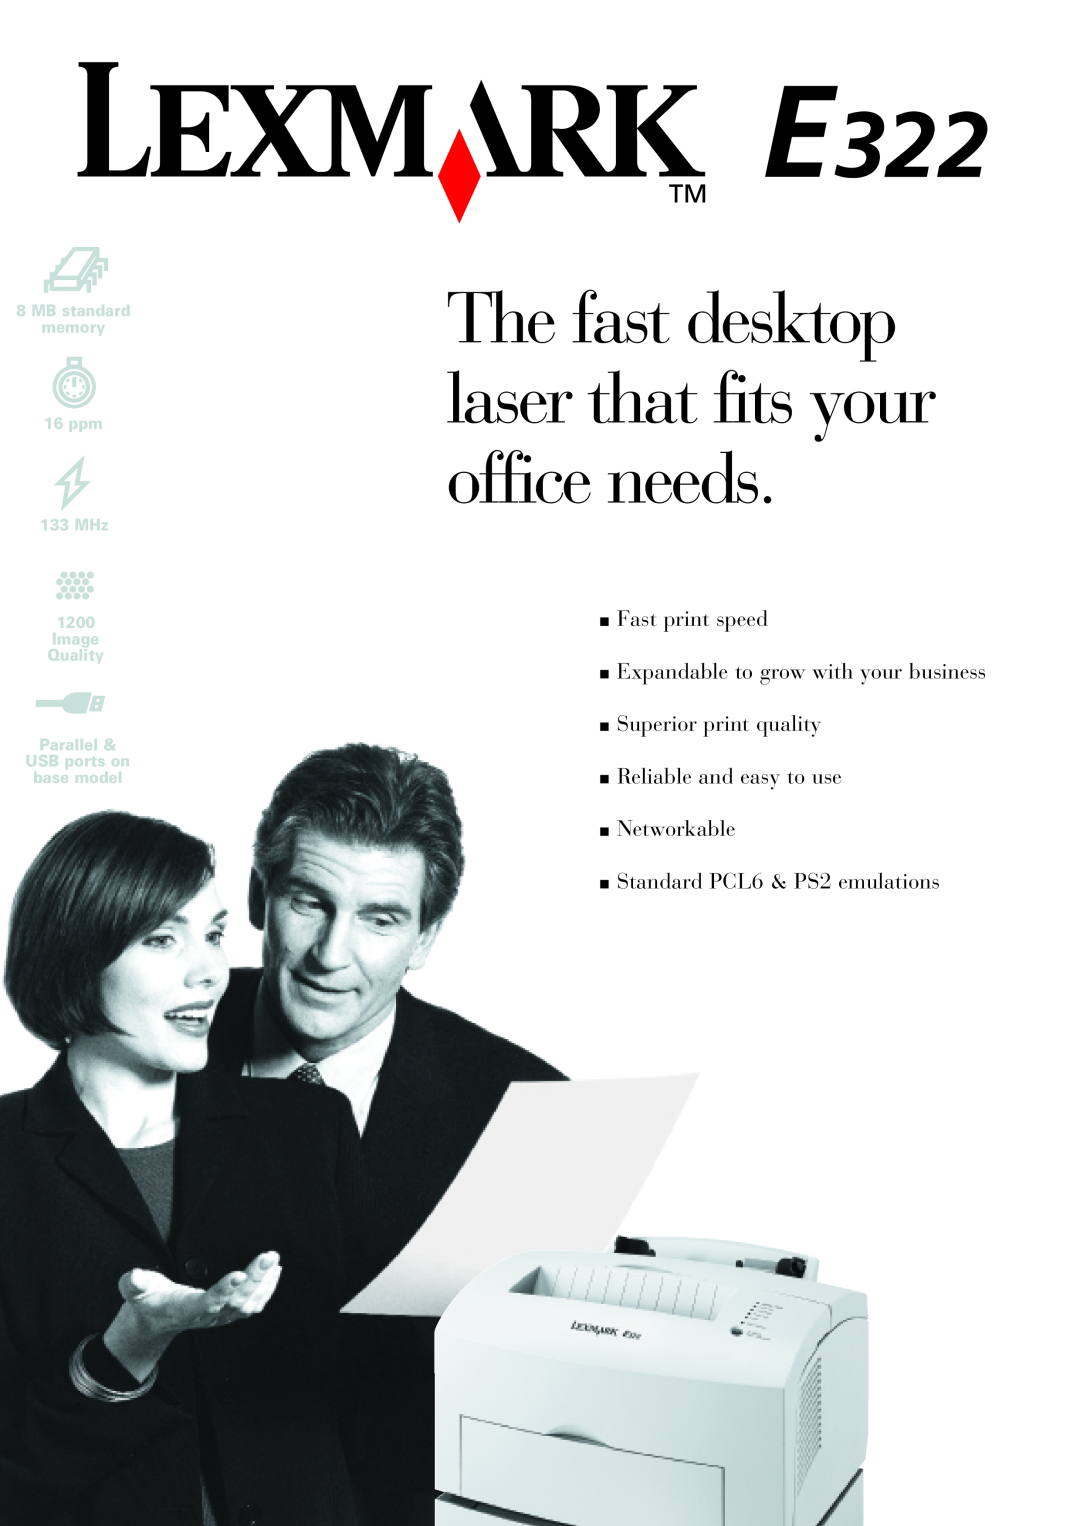 Lexmark E322 manual The fast desktop laser that fits your office needs, Standard PCL6 & PS2 emulations 